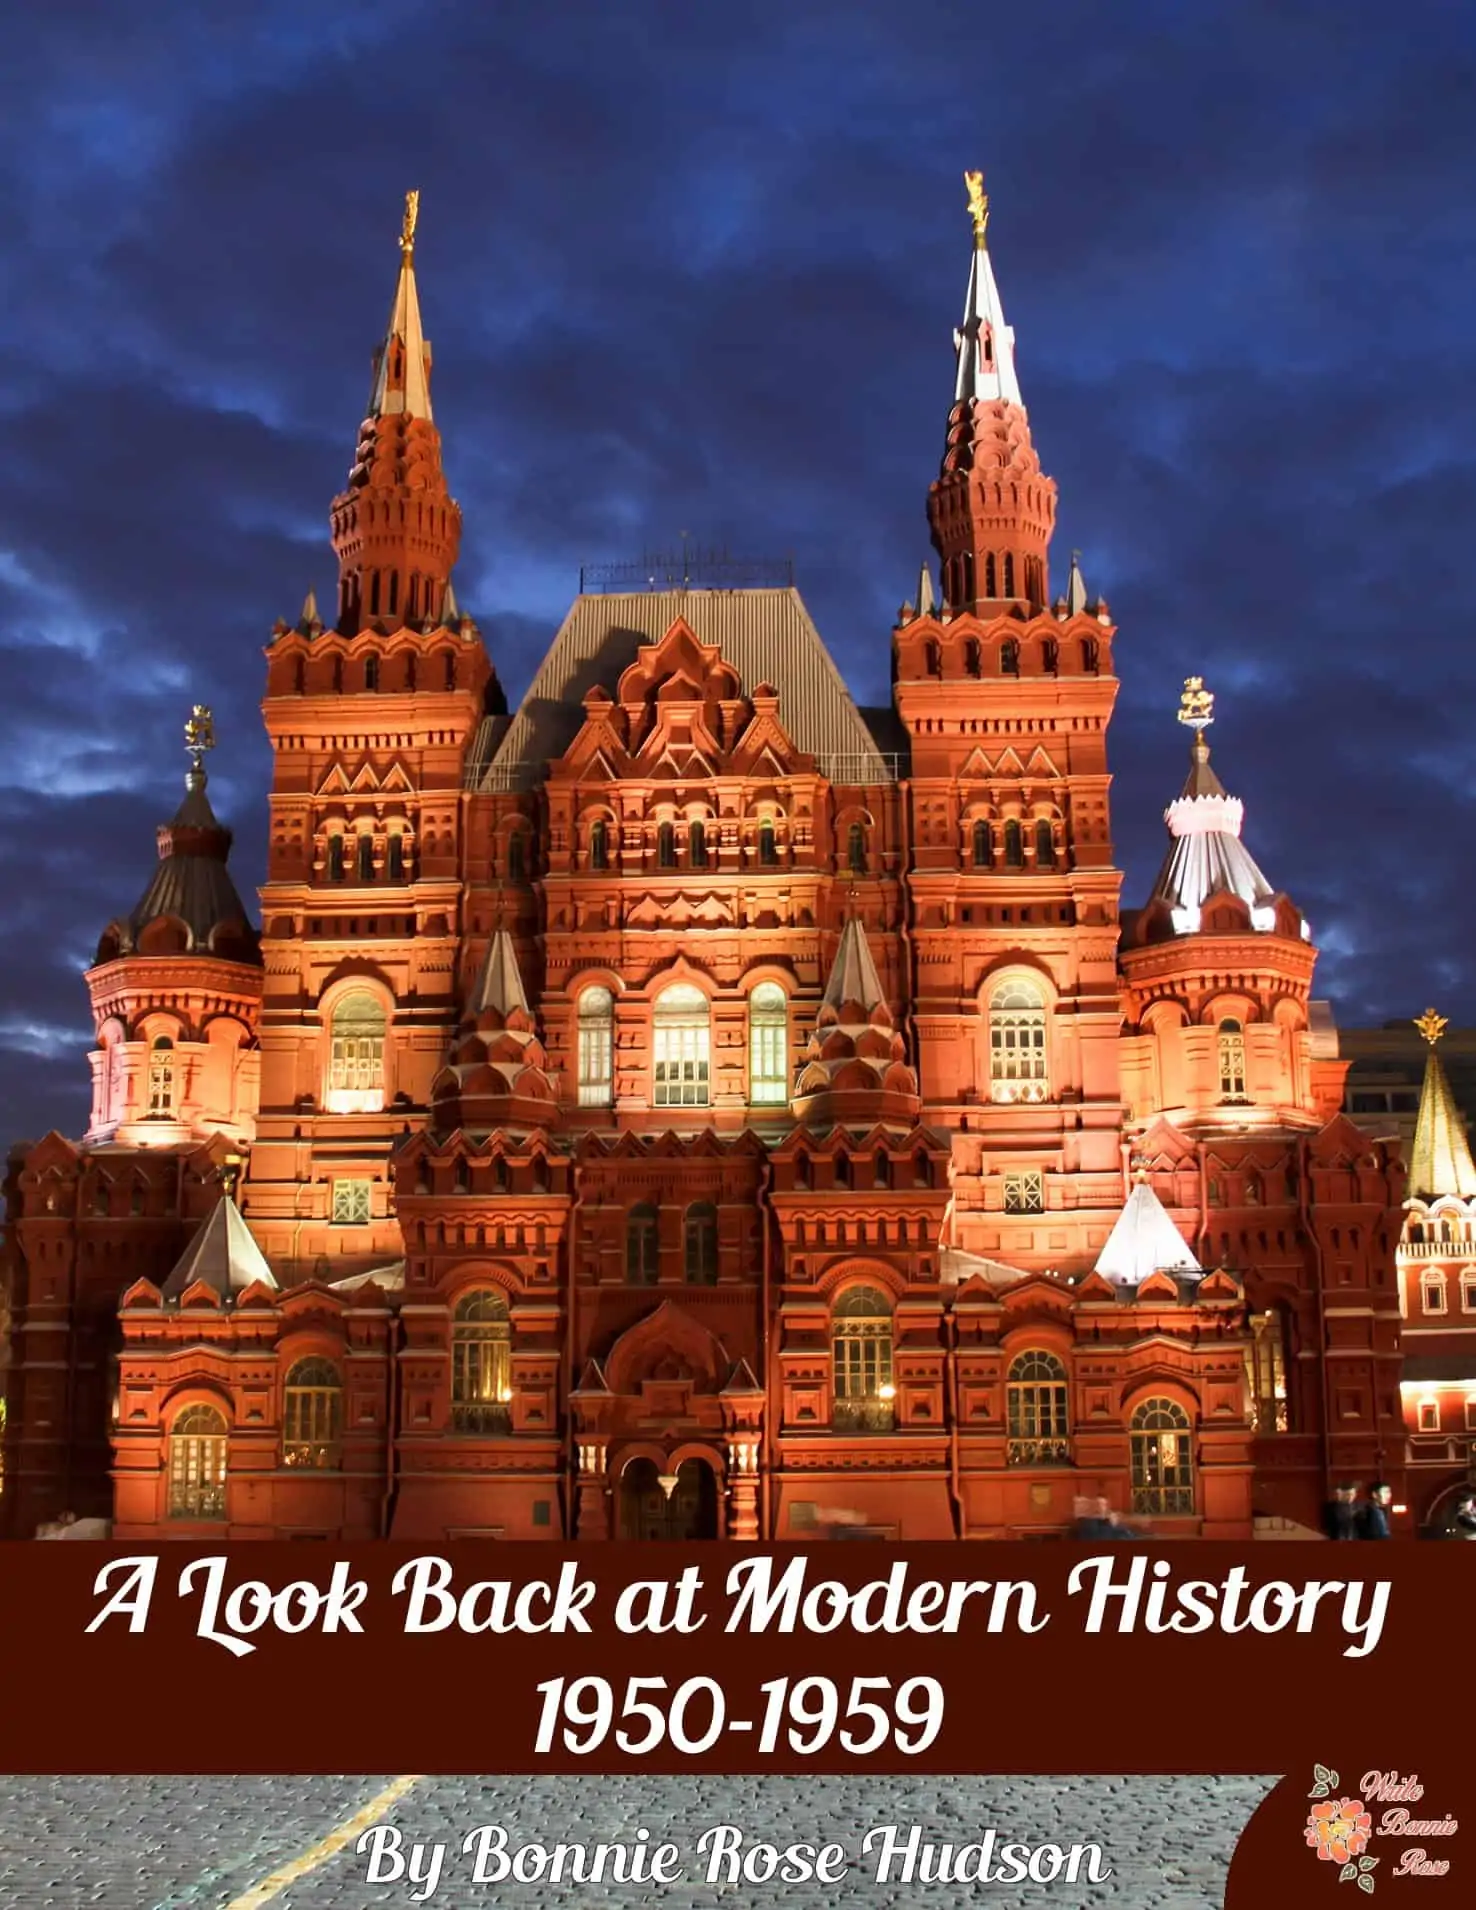 A Look Back at Modern History 1950s text with image of a large castle building outside